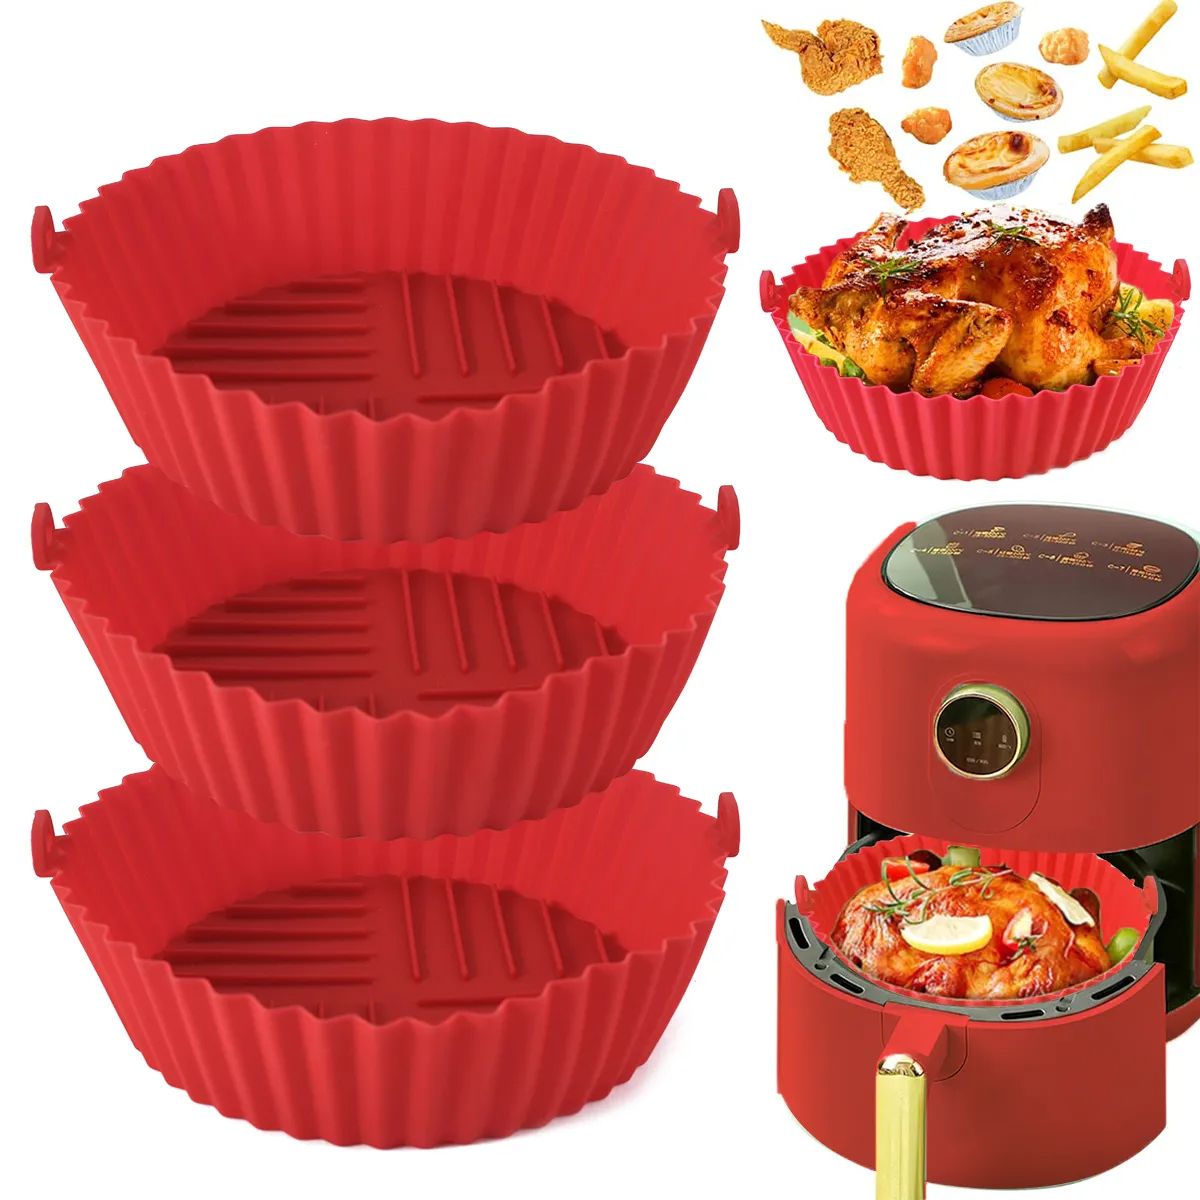 Air Fryer Silicone Liners Air Fryer Silicone Pot Reusable Silicone Air Fryer Liners Food Safe Non Stick Air Fryer Basket Accessories